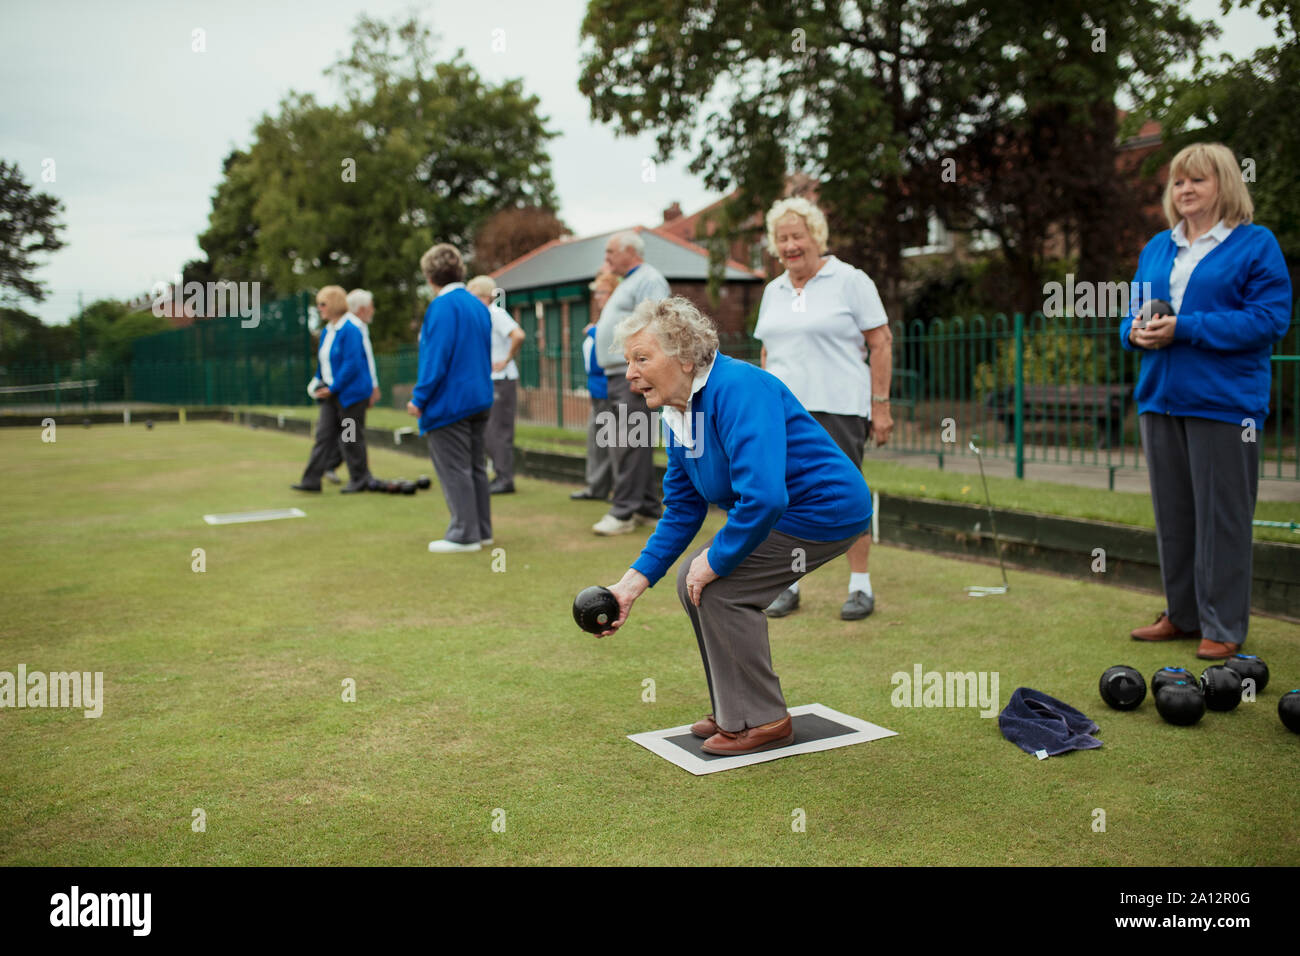 A side view shot of a senior woman playing lawn bowling with other seniors. Stock Photo